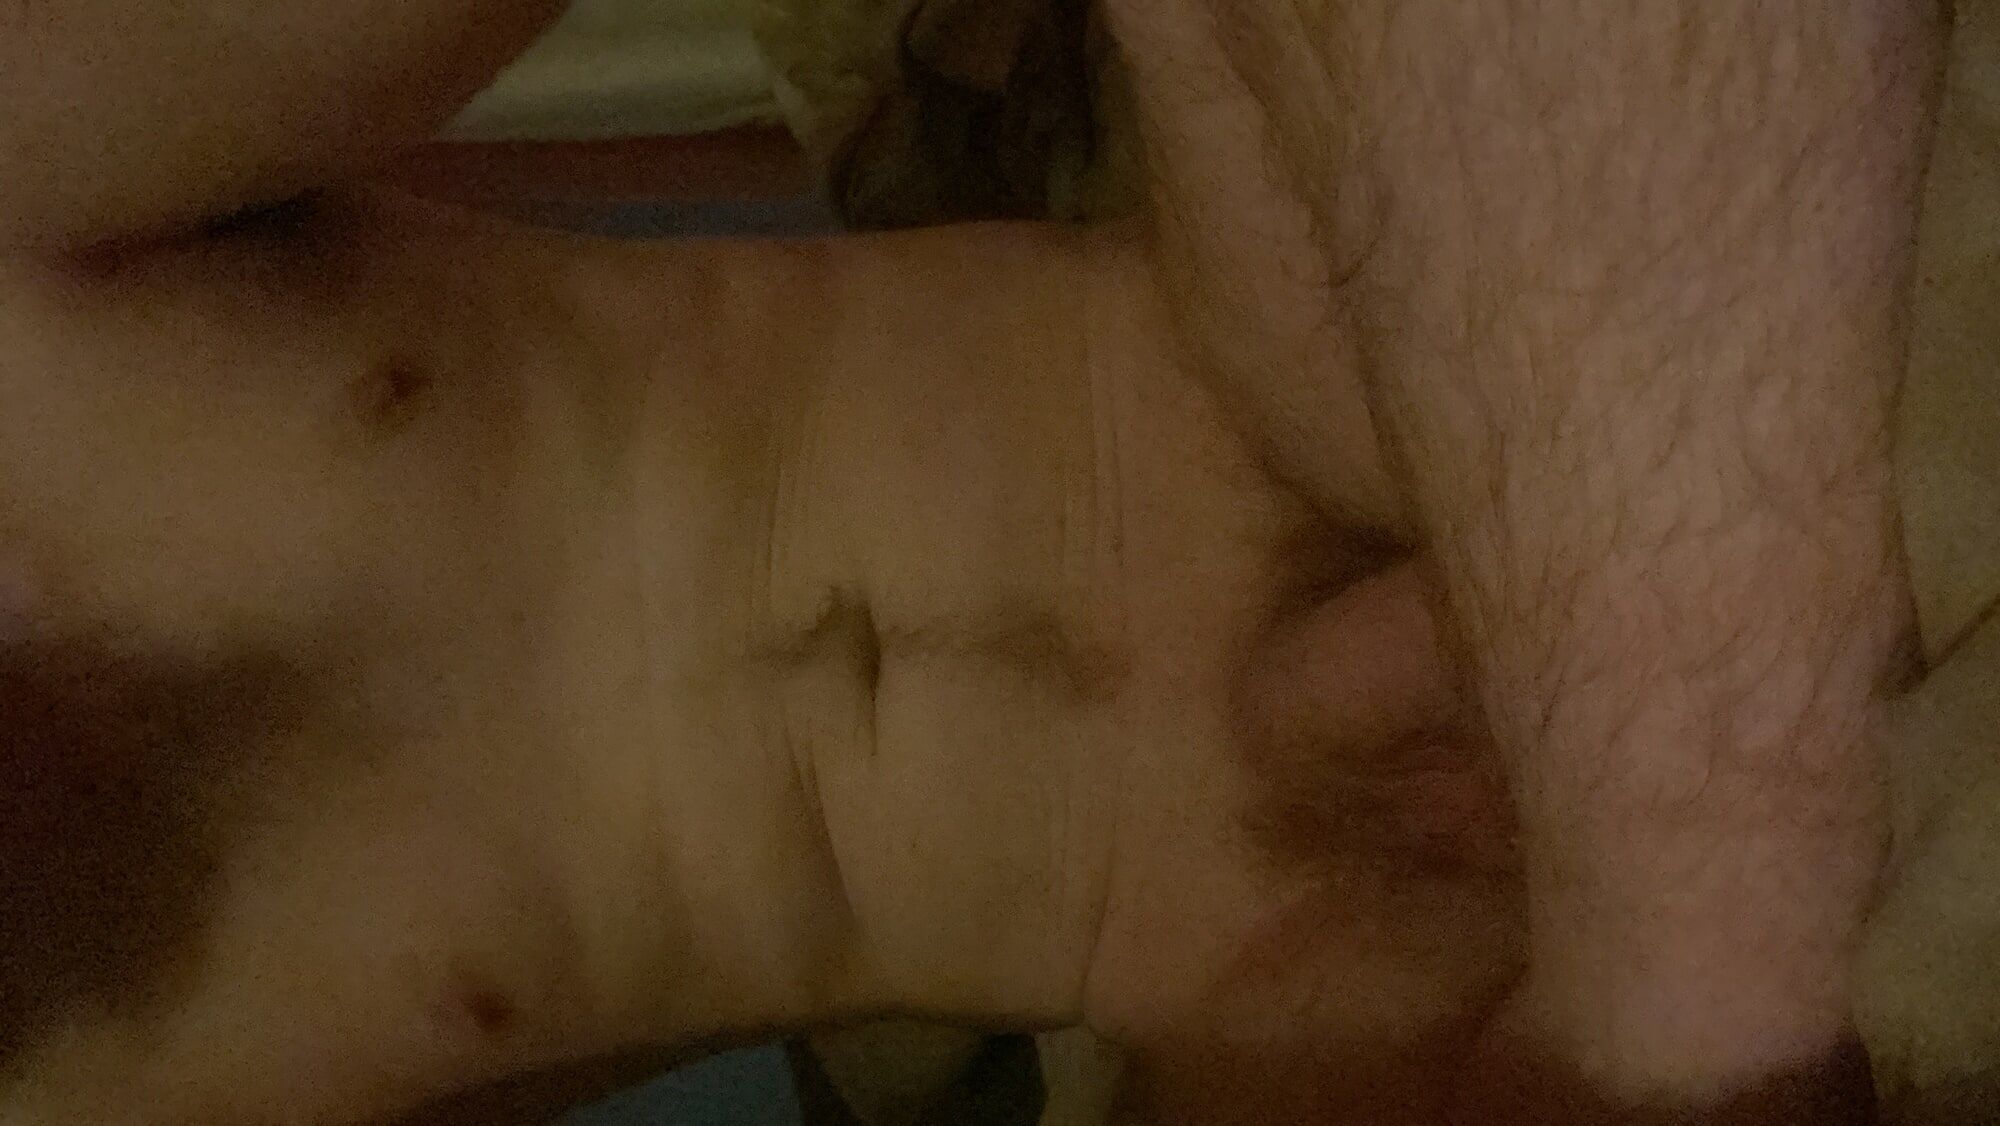 My penis maybe a little small for some #3